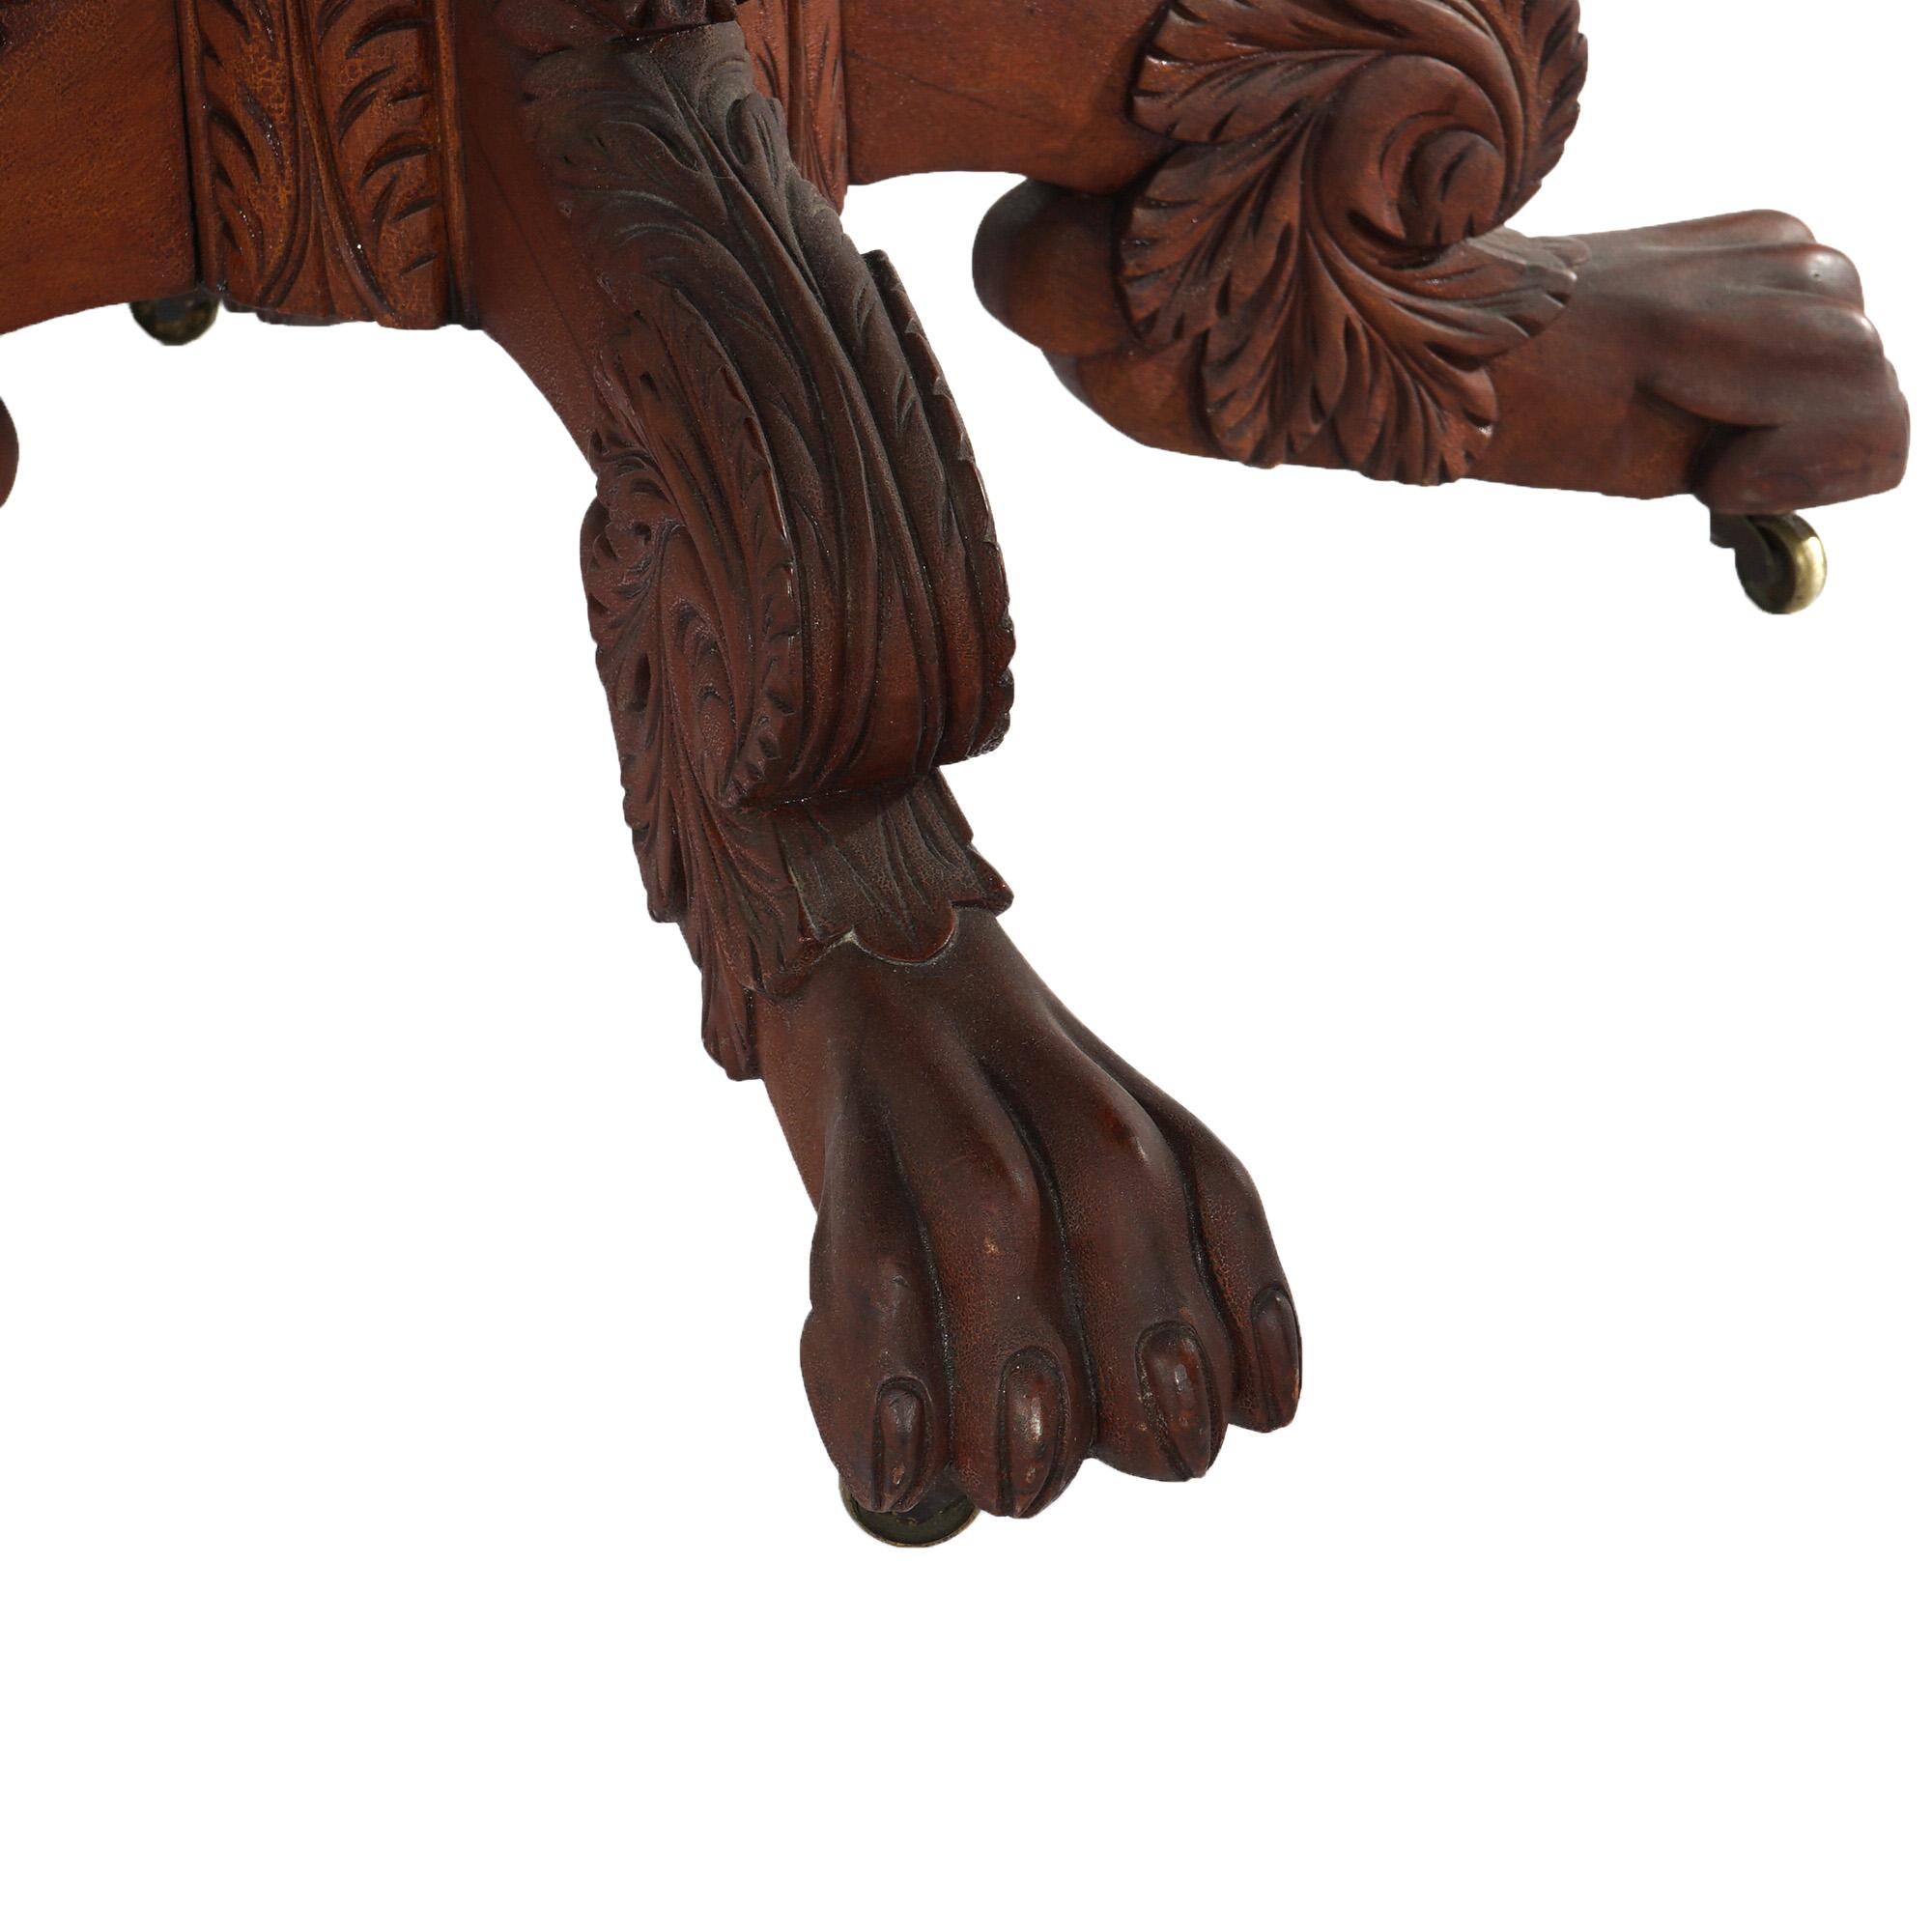 Antique Neoclassical American Empire Carved Flame Mahogany Drop Leaf Table c1880 For Sale 4